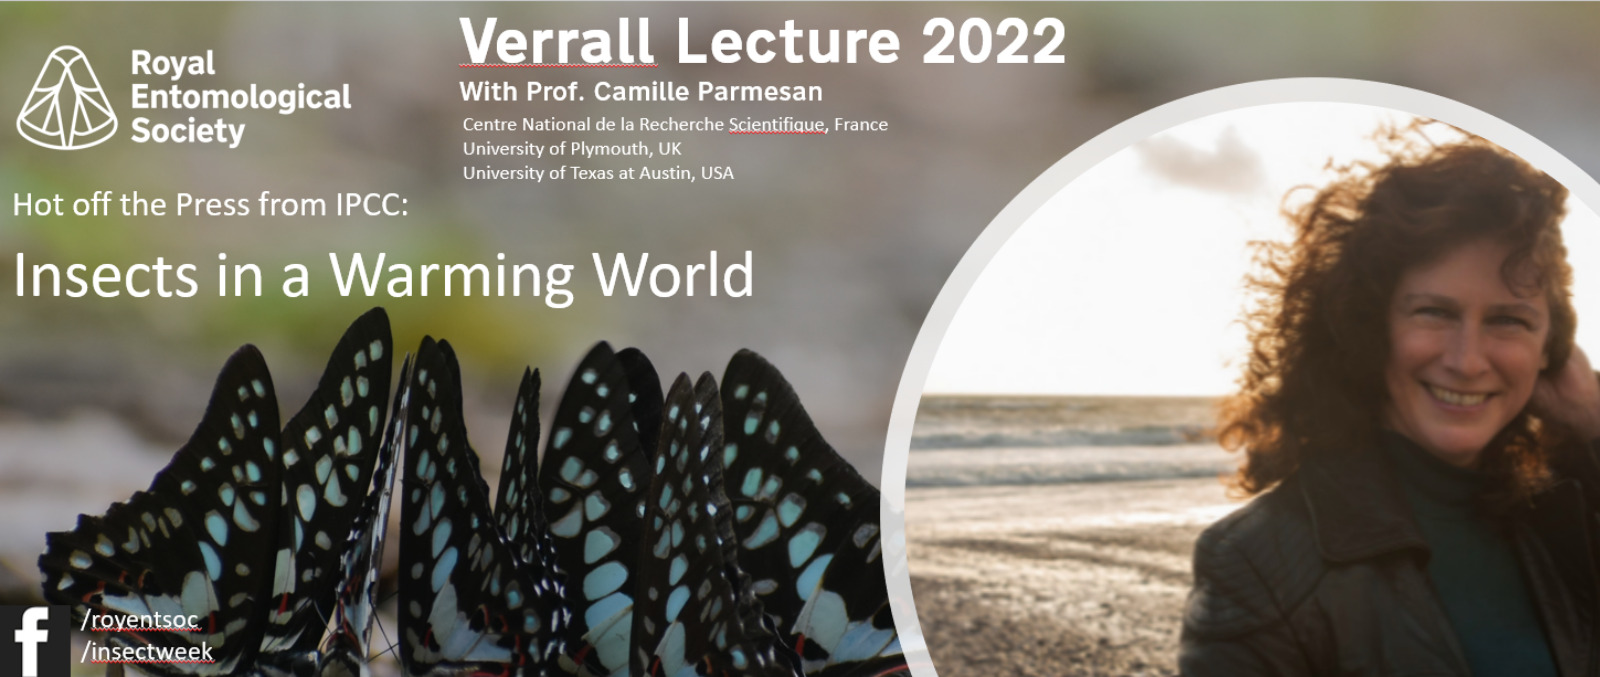 Watch the Verrall Lecture 2022 by Professor Camille Parmesan pic image